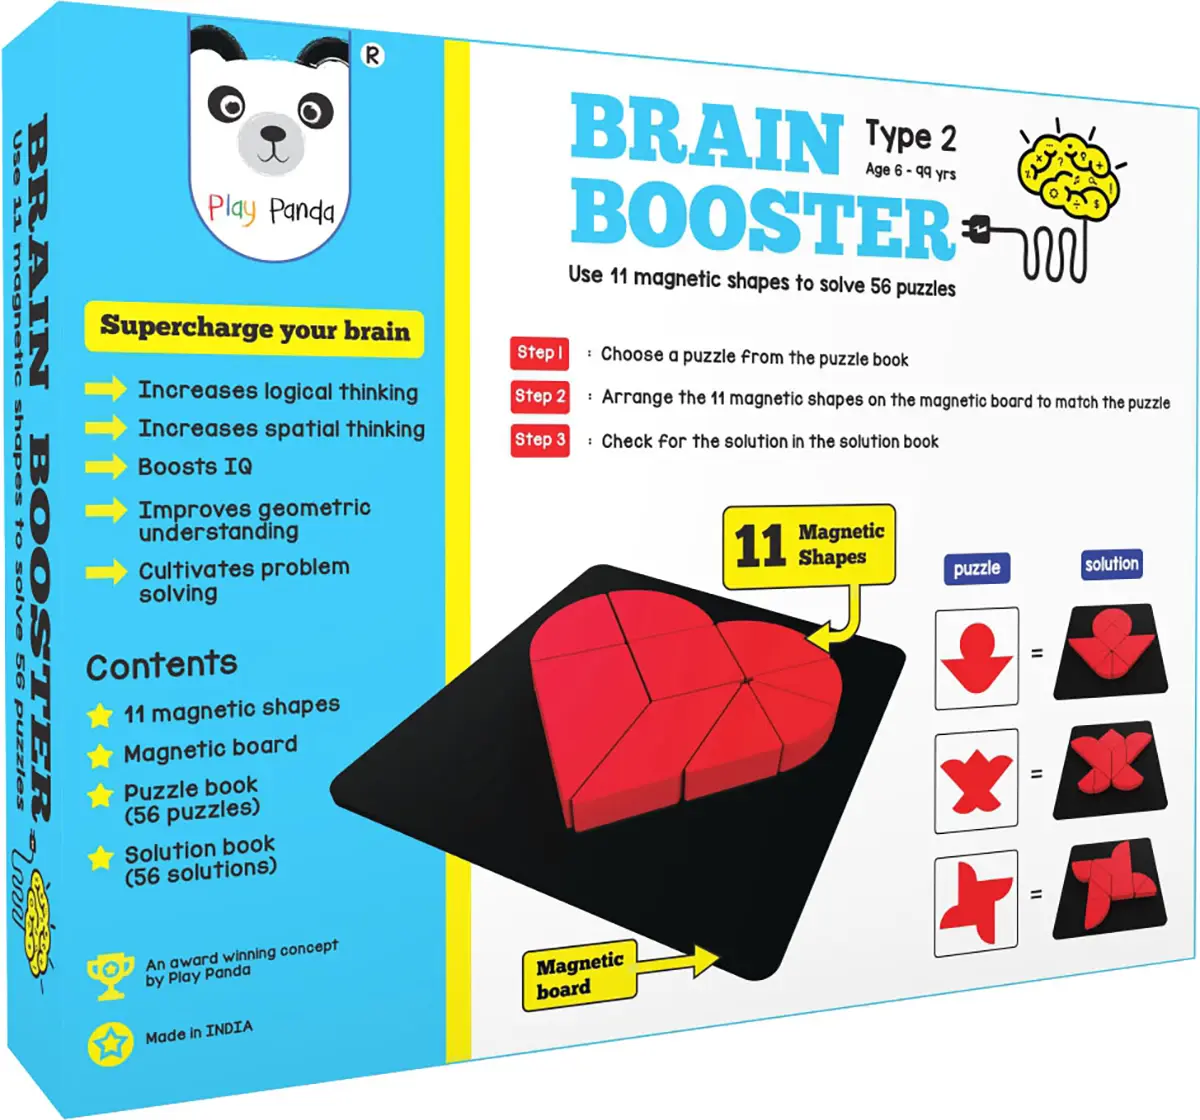 Play Panda Brain Booster Set 2 - 56 Puzzles Designed To Boost Intelligence - With Magnetic Shapes, Magnetic Board, Puzzle Book And Solution Book Puzzles for Kids Age 6Y+